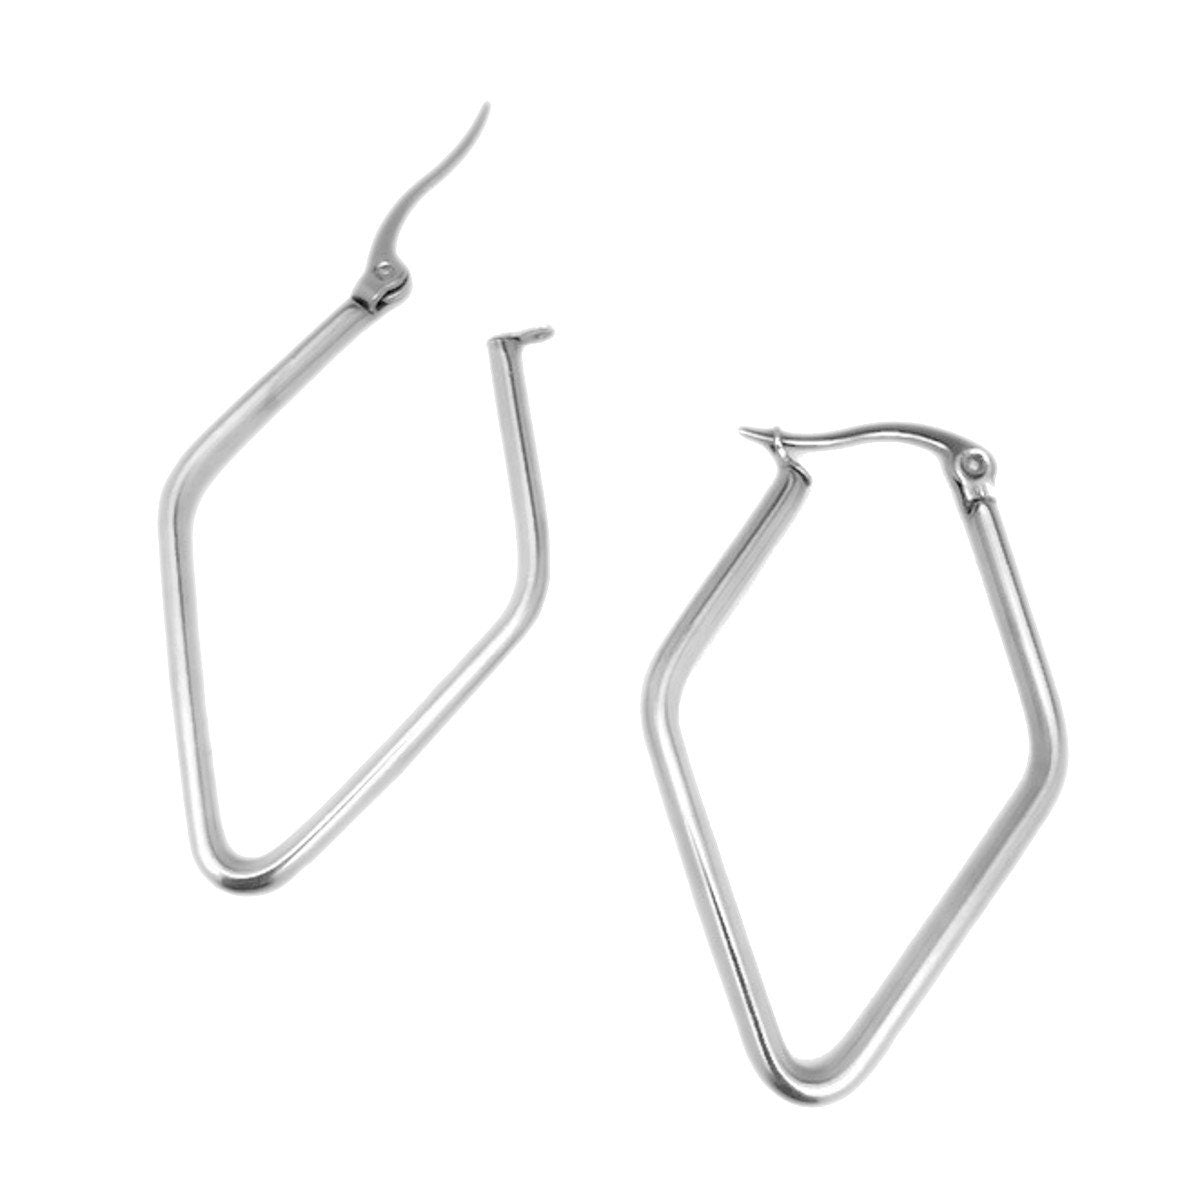 Diamond Shaped Hoop Earrings, Unique Hoops, Stainless Steel Jewelry for Women, Minimalist Jewelry, Gifts for Mom